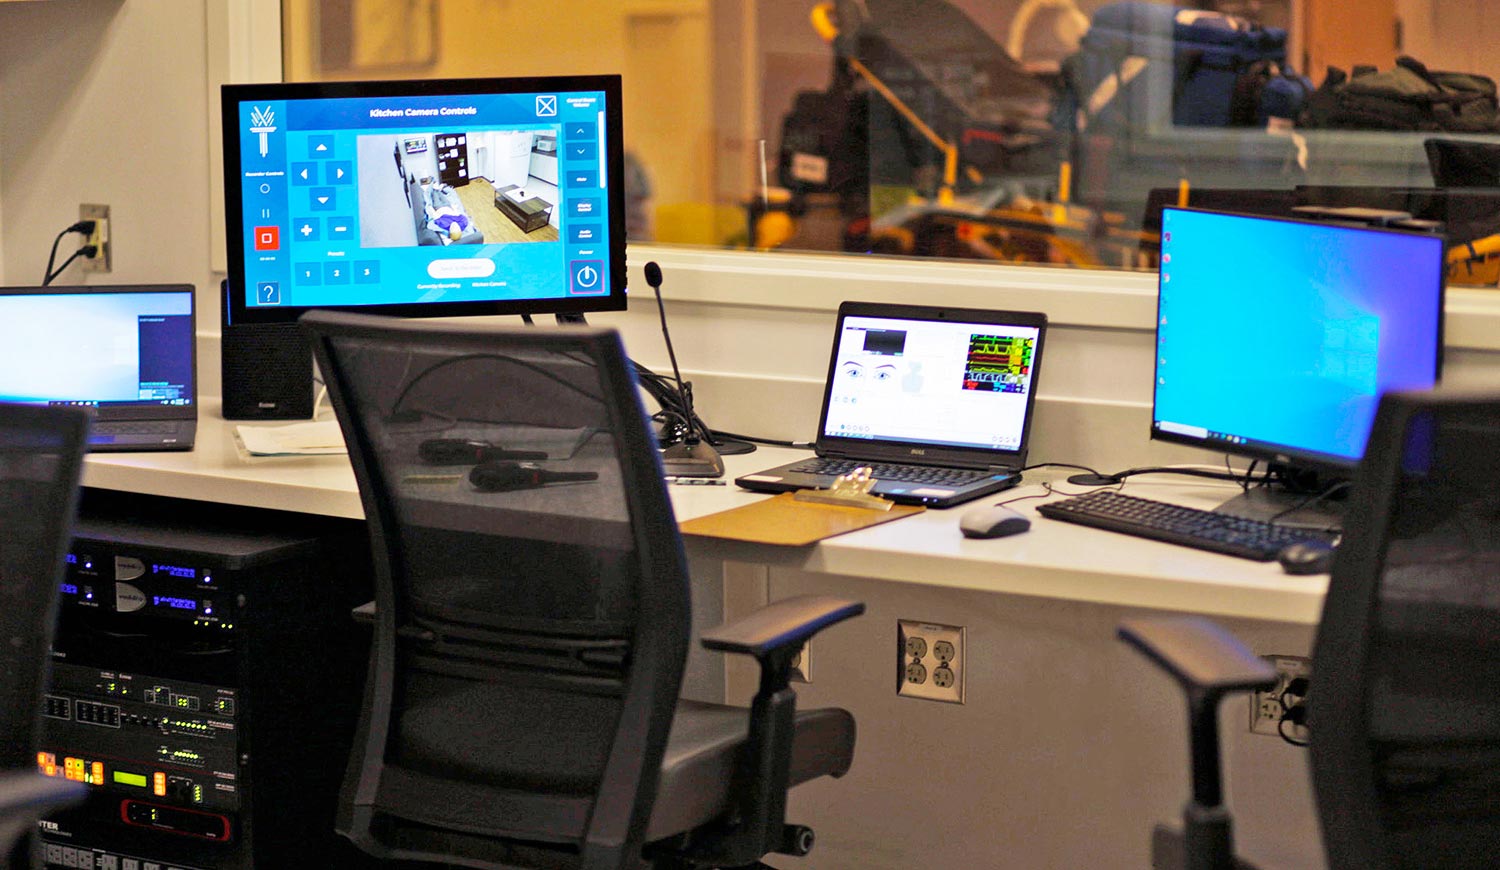 The instructor station in the control room of the Emergency Medical Services simulation suite at the Wake Technical Community College Perry Health Sciences Campus.